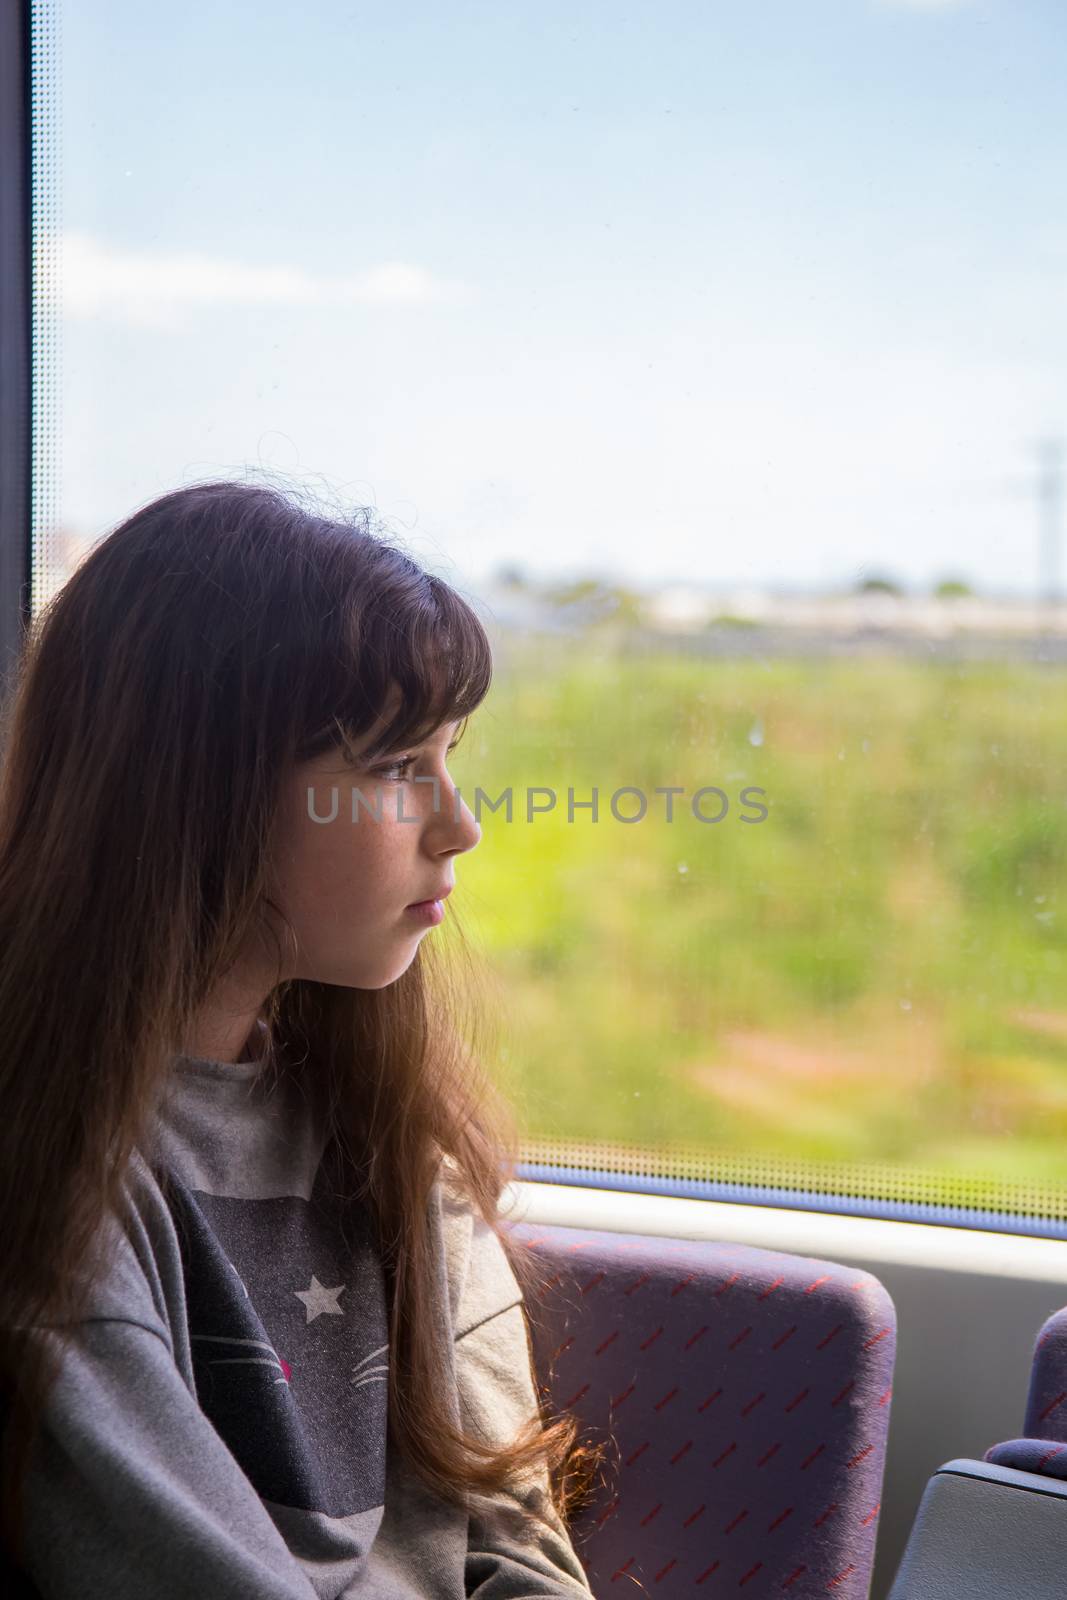 Beautiful teenage girl with long brown hair rides a commuter train and looks out the window.